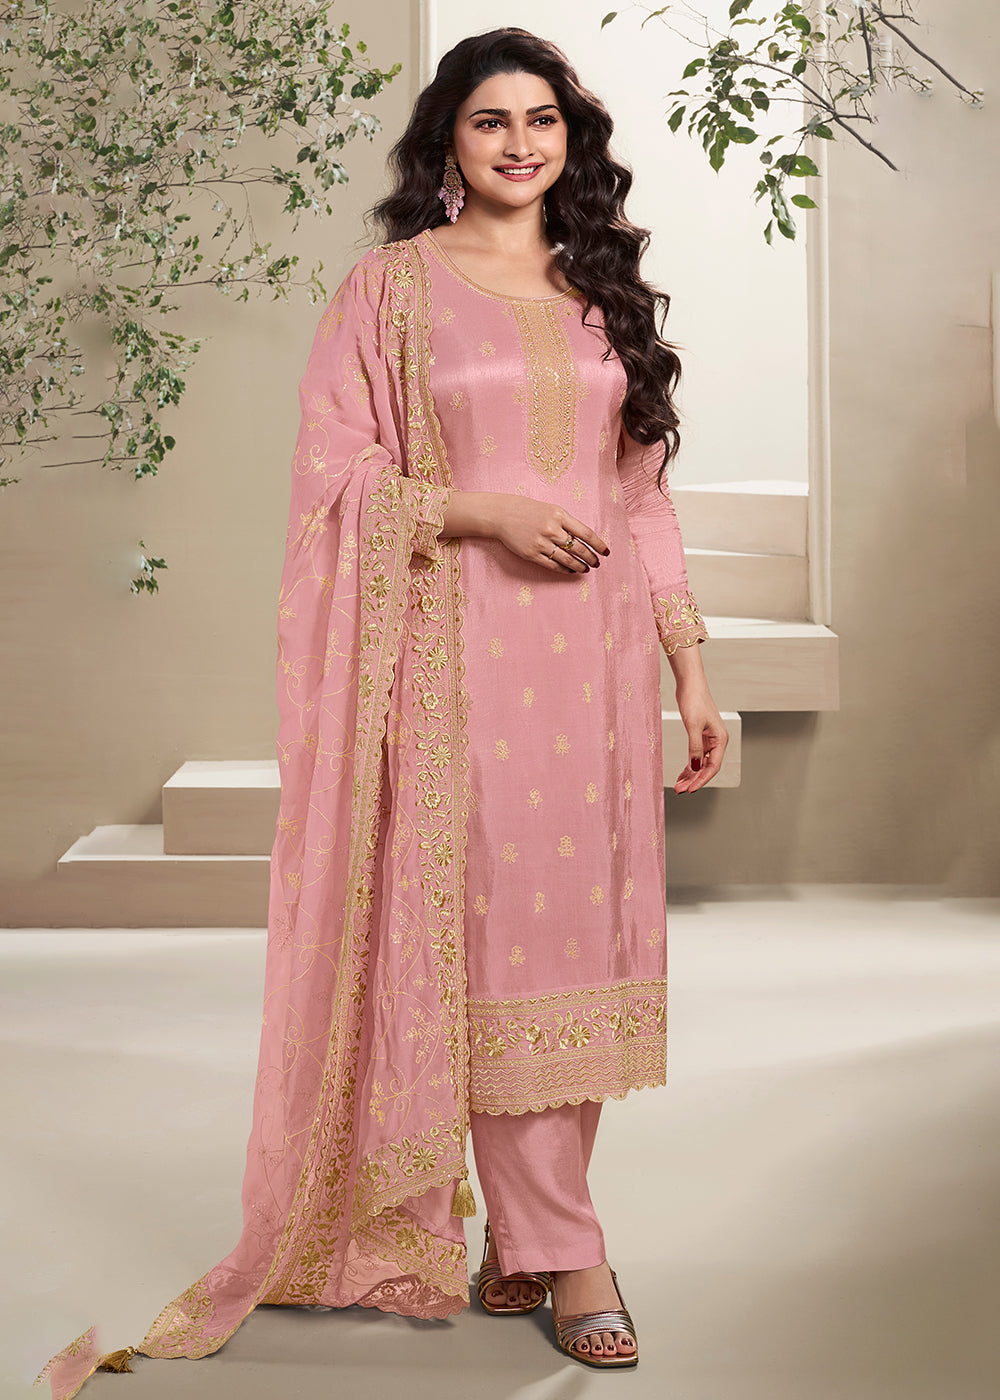 Buy Now Dola Silk Peach Thread Embroidered Wedding Salwar Suit Online in USA, UK, Canada, Germany, Australia & Worldwide at Empress Clothing. 